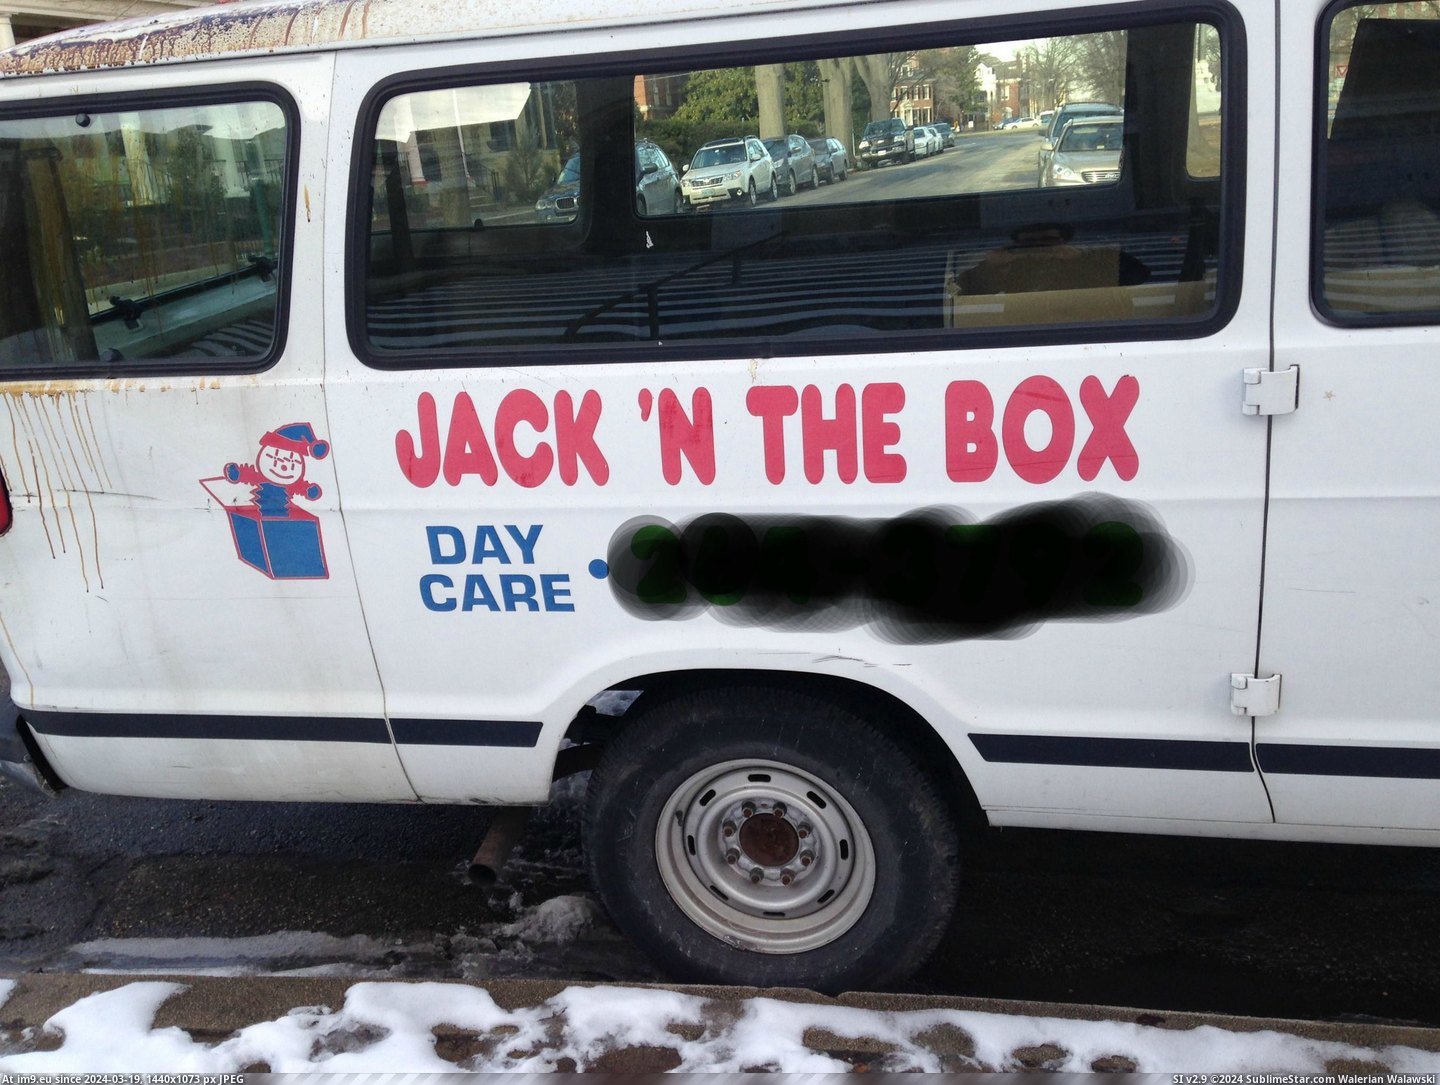 #Wtf #Saw #Town #Van [Wtf] A van I saw in my town. Something doesn't look right... 3 Pic. (Image of album My r/WTF favs))